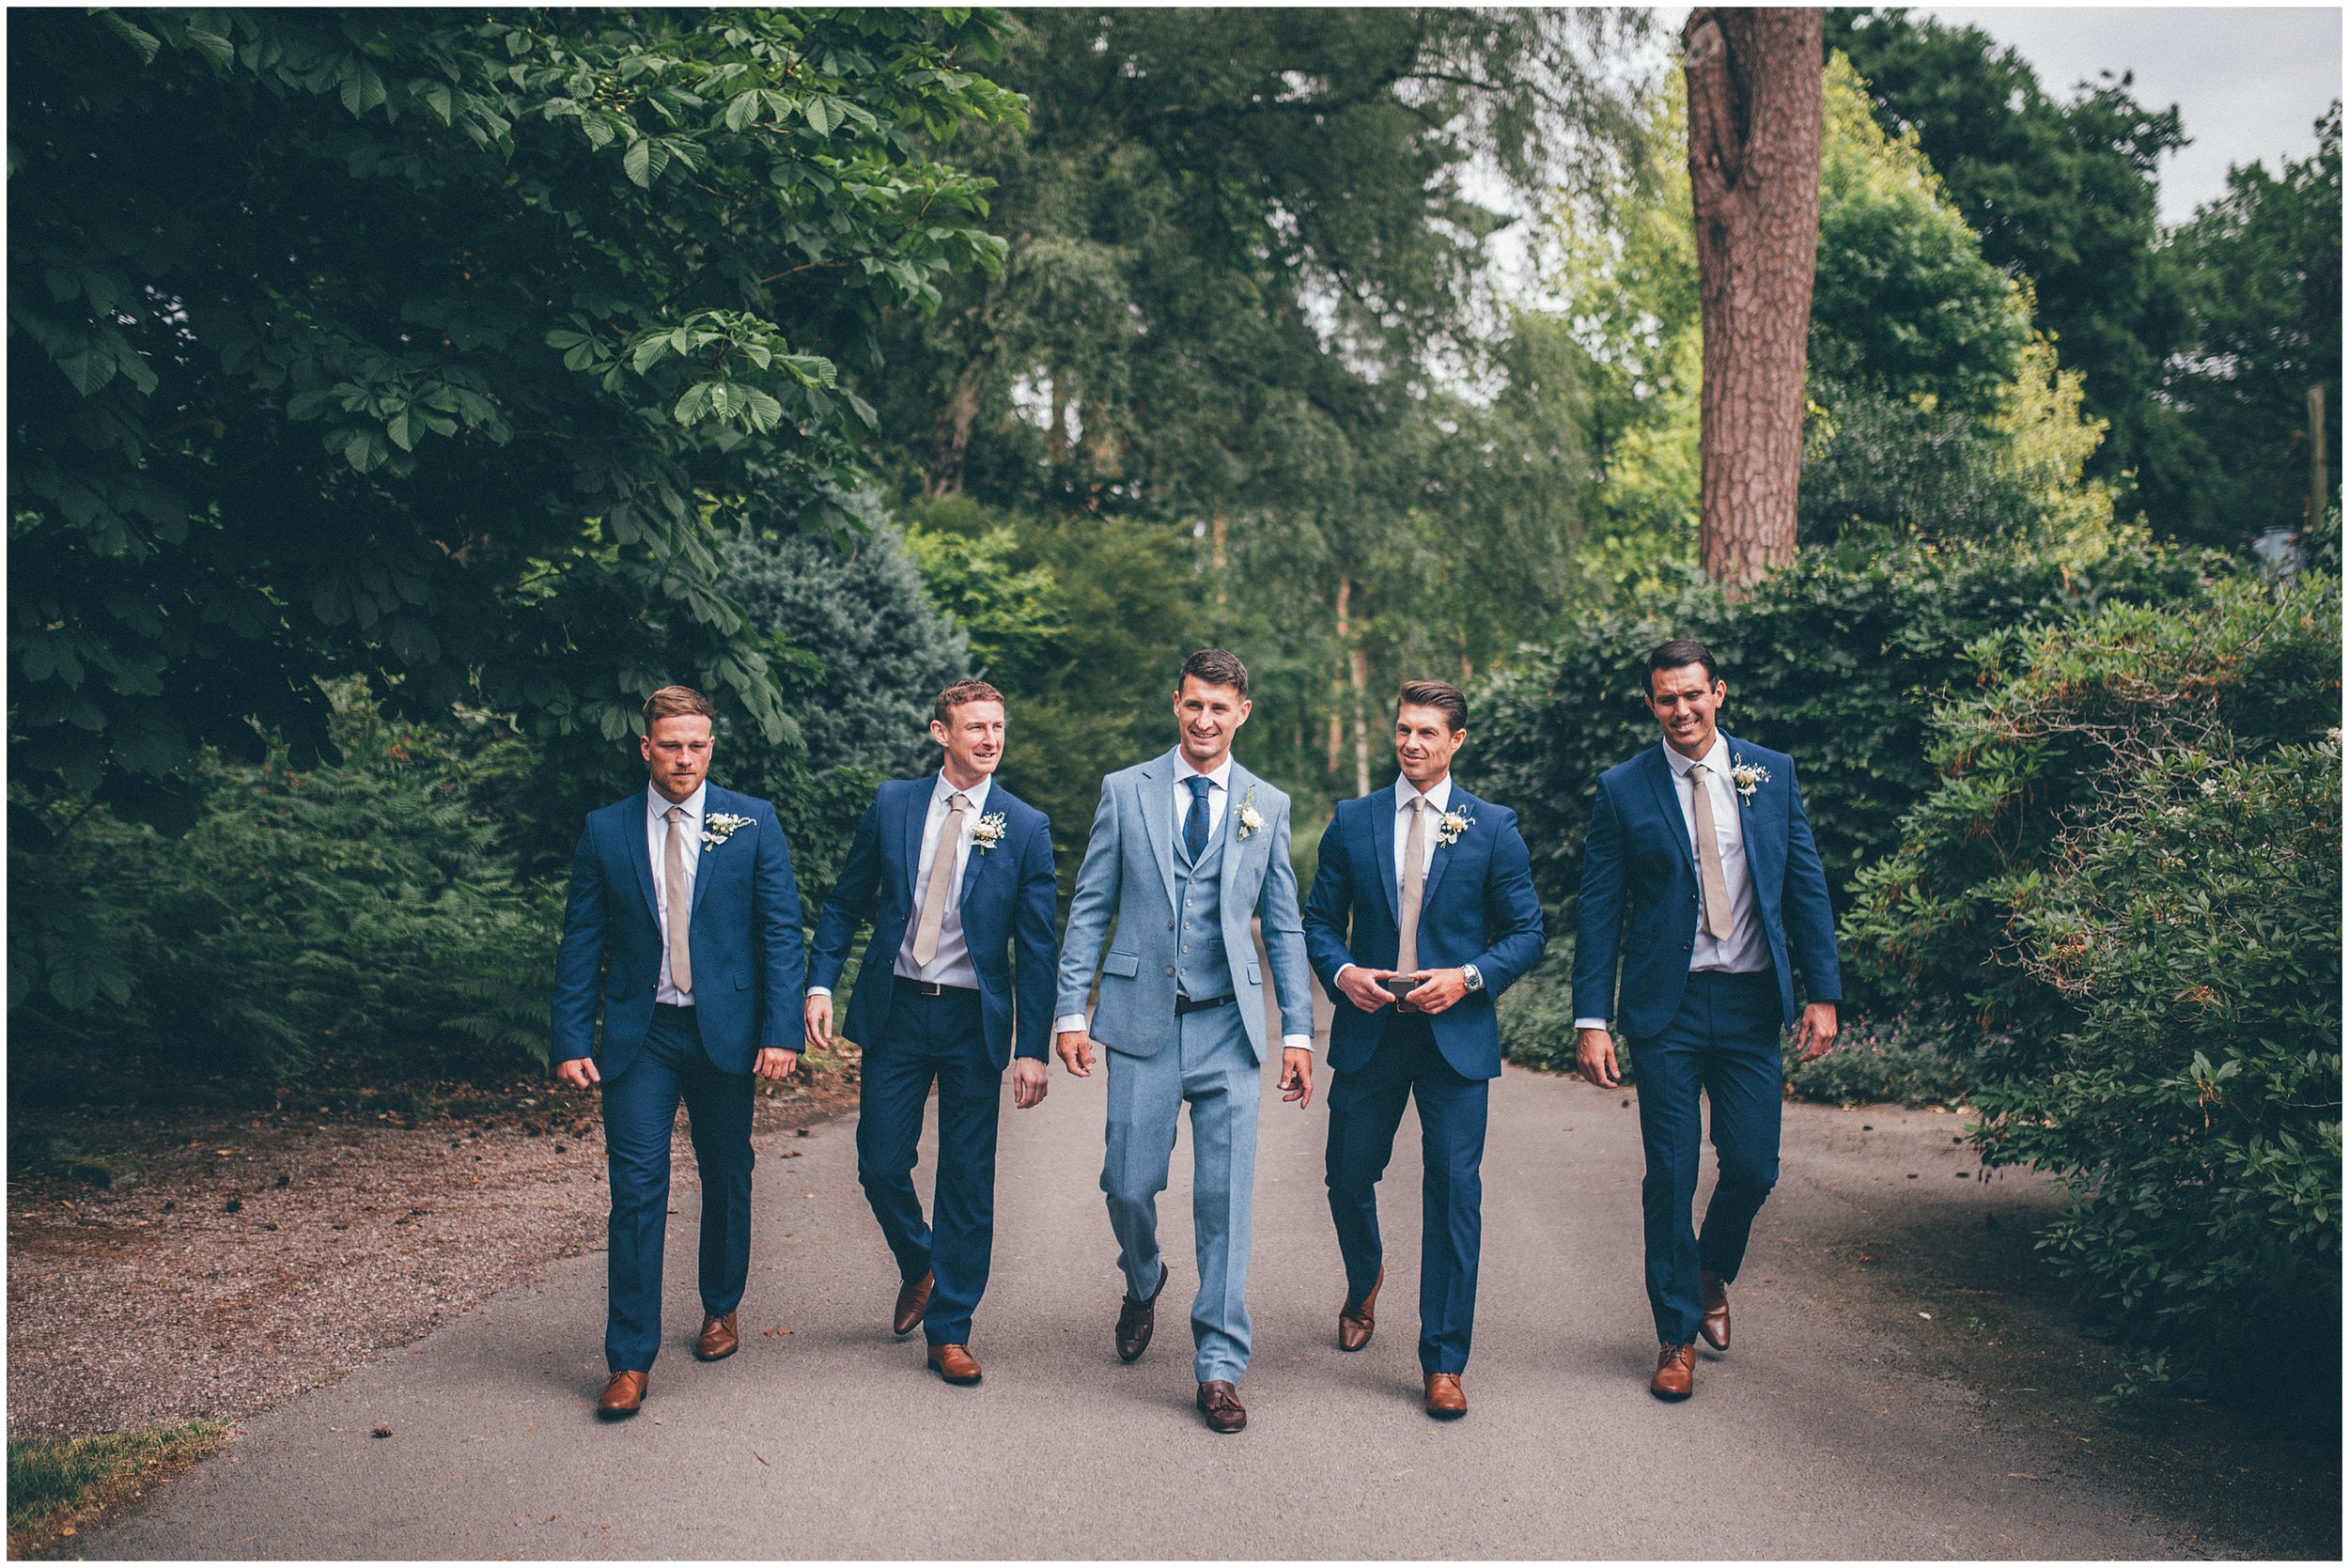 Groom gets ready at Abbeywood Estate wedding venue in Delamere, Cheshire